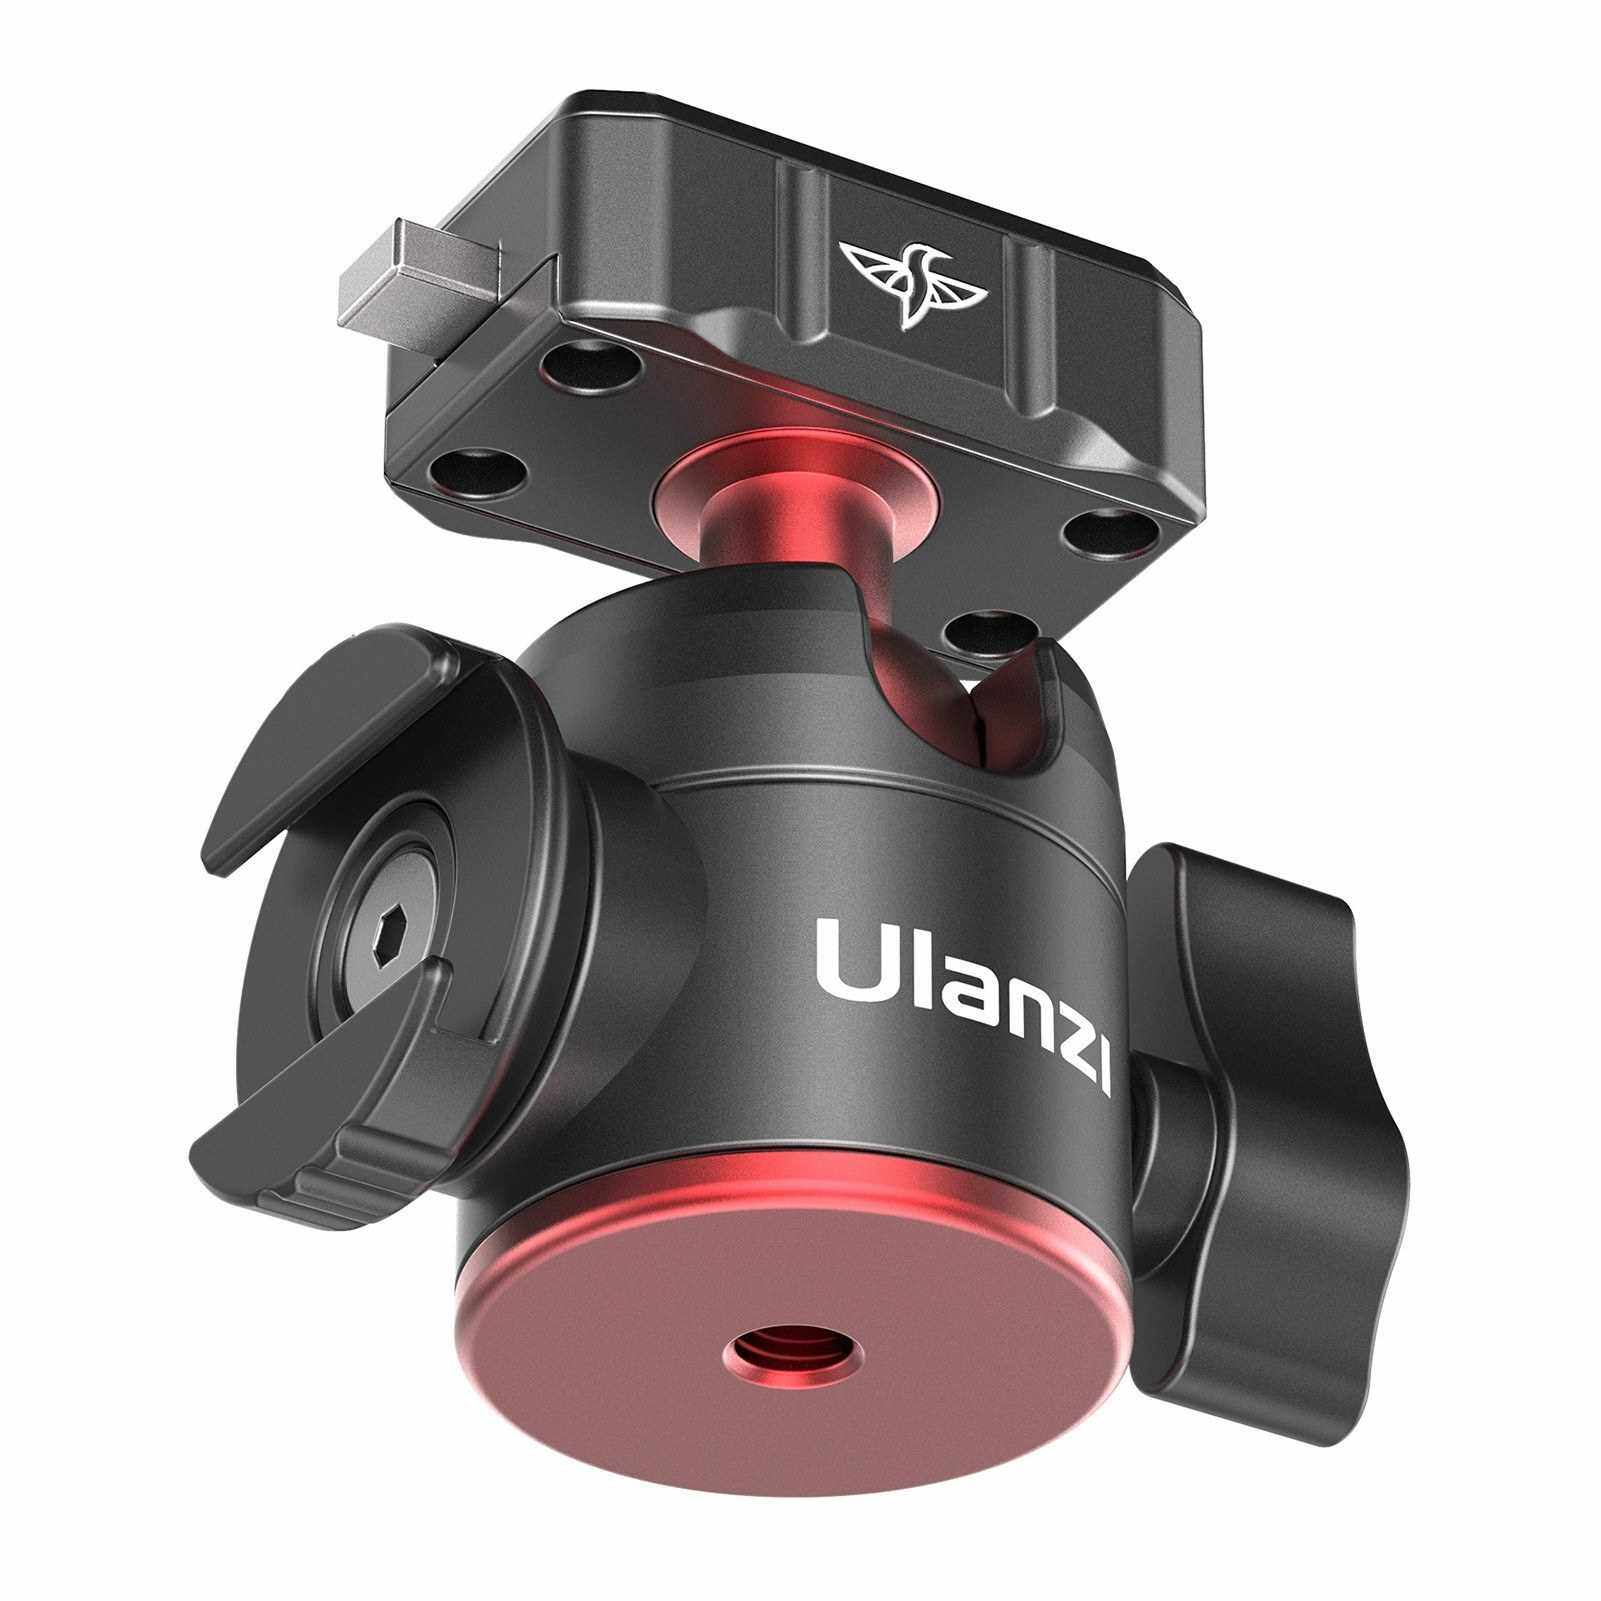 Ulanzi Mini Ball Head Mount Adapter 2KG Payload with Quick Release Plate Cold Shoe Mount Universal 1/4 Interface for Tripod Camera Mounting (Standard)